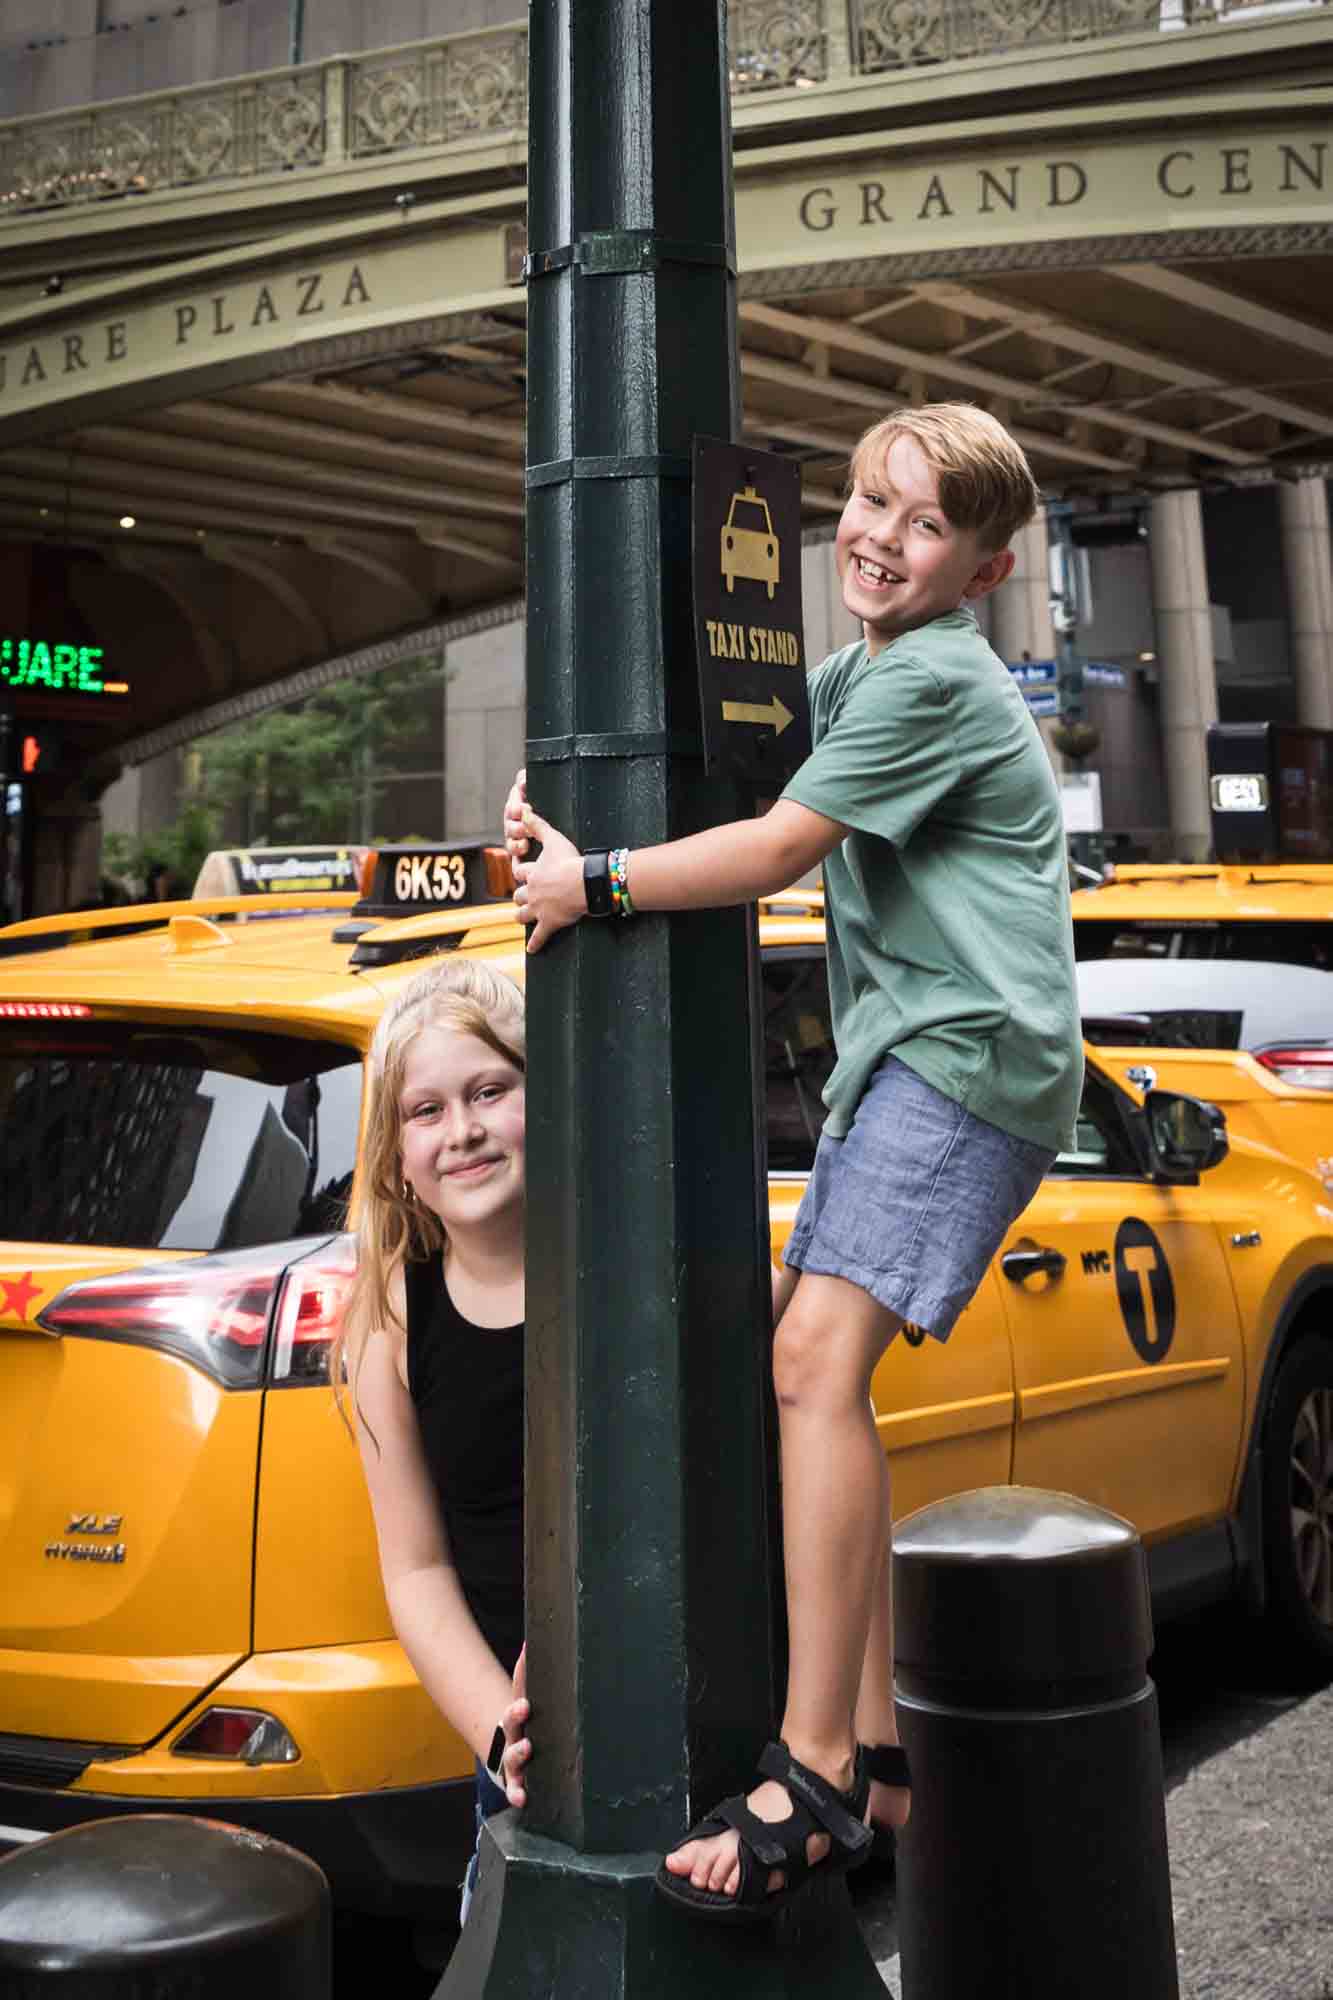 Boy and girl hugging light pole in front of yellow taxis